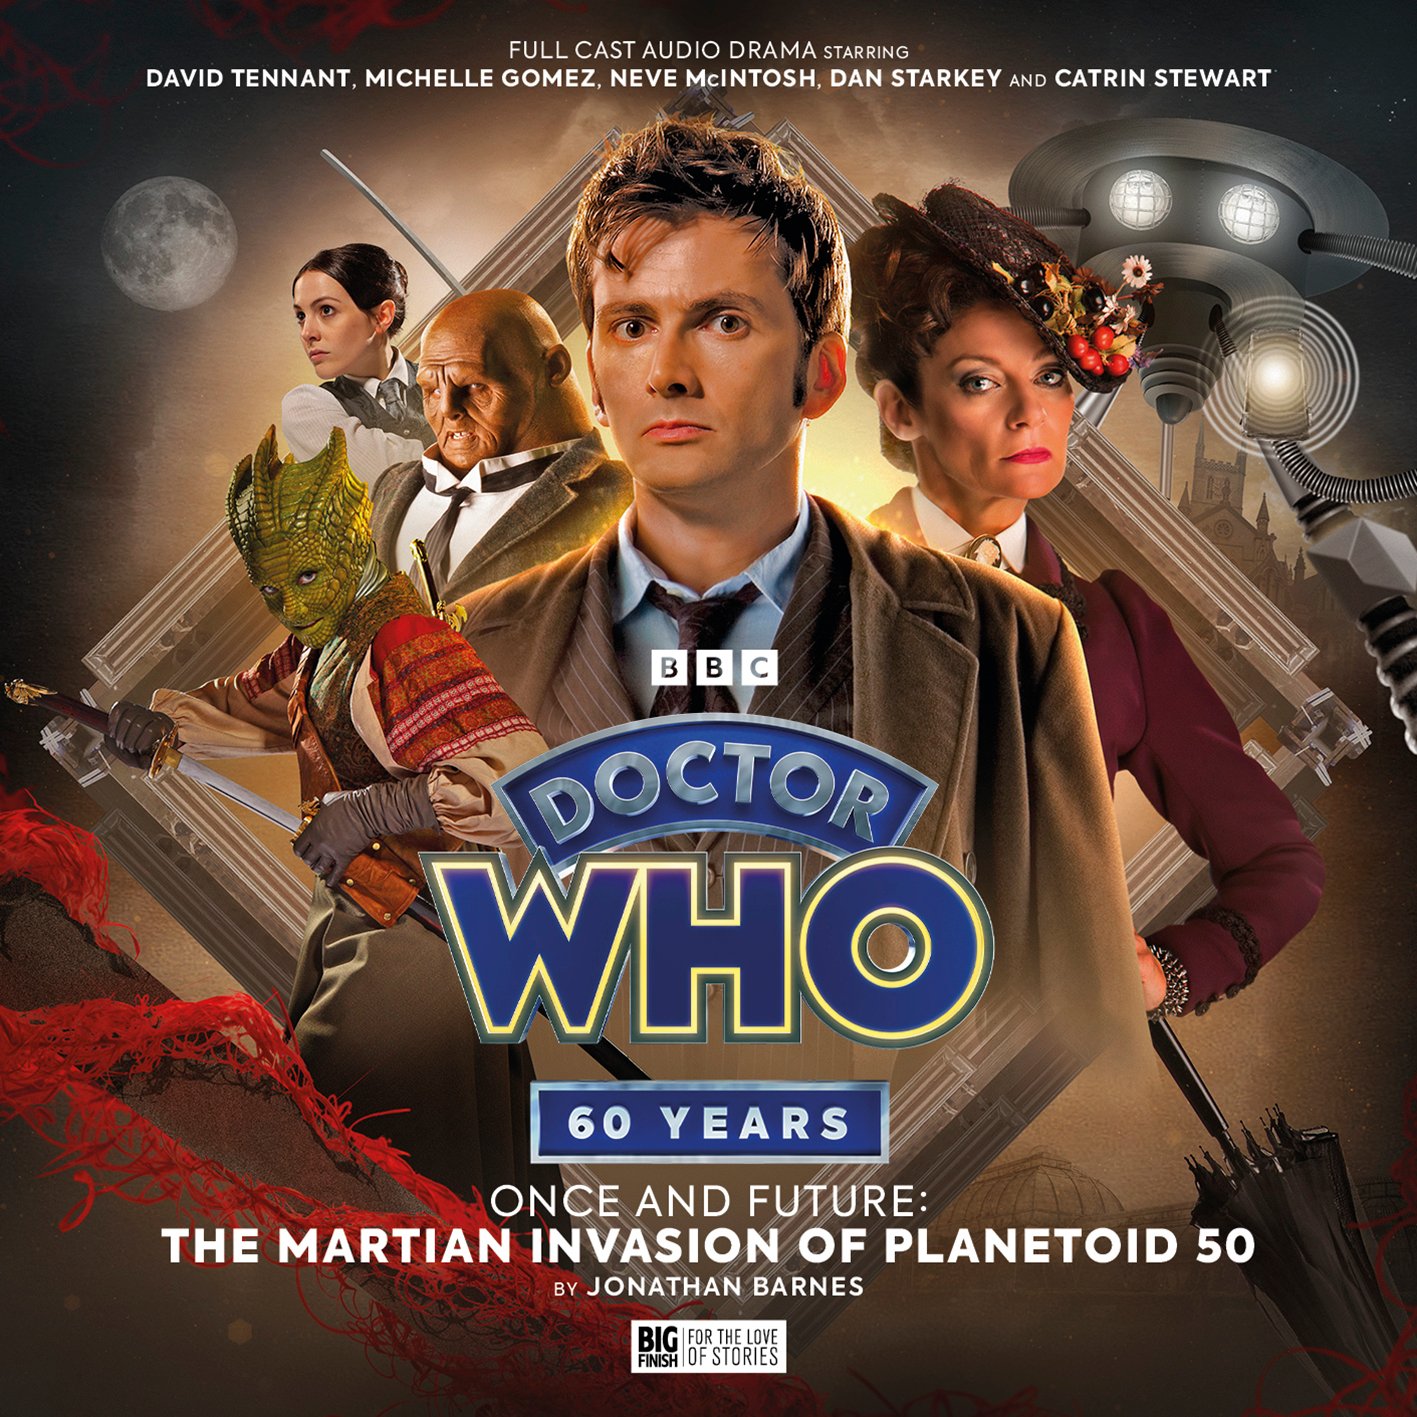 David Tennant Joins Big Finish’s 60th Anniversary Celebrations as the Tenth Doctor